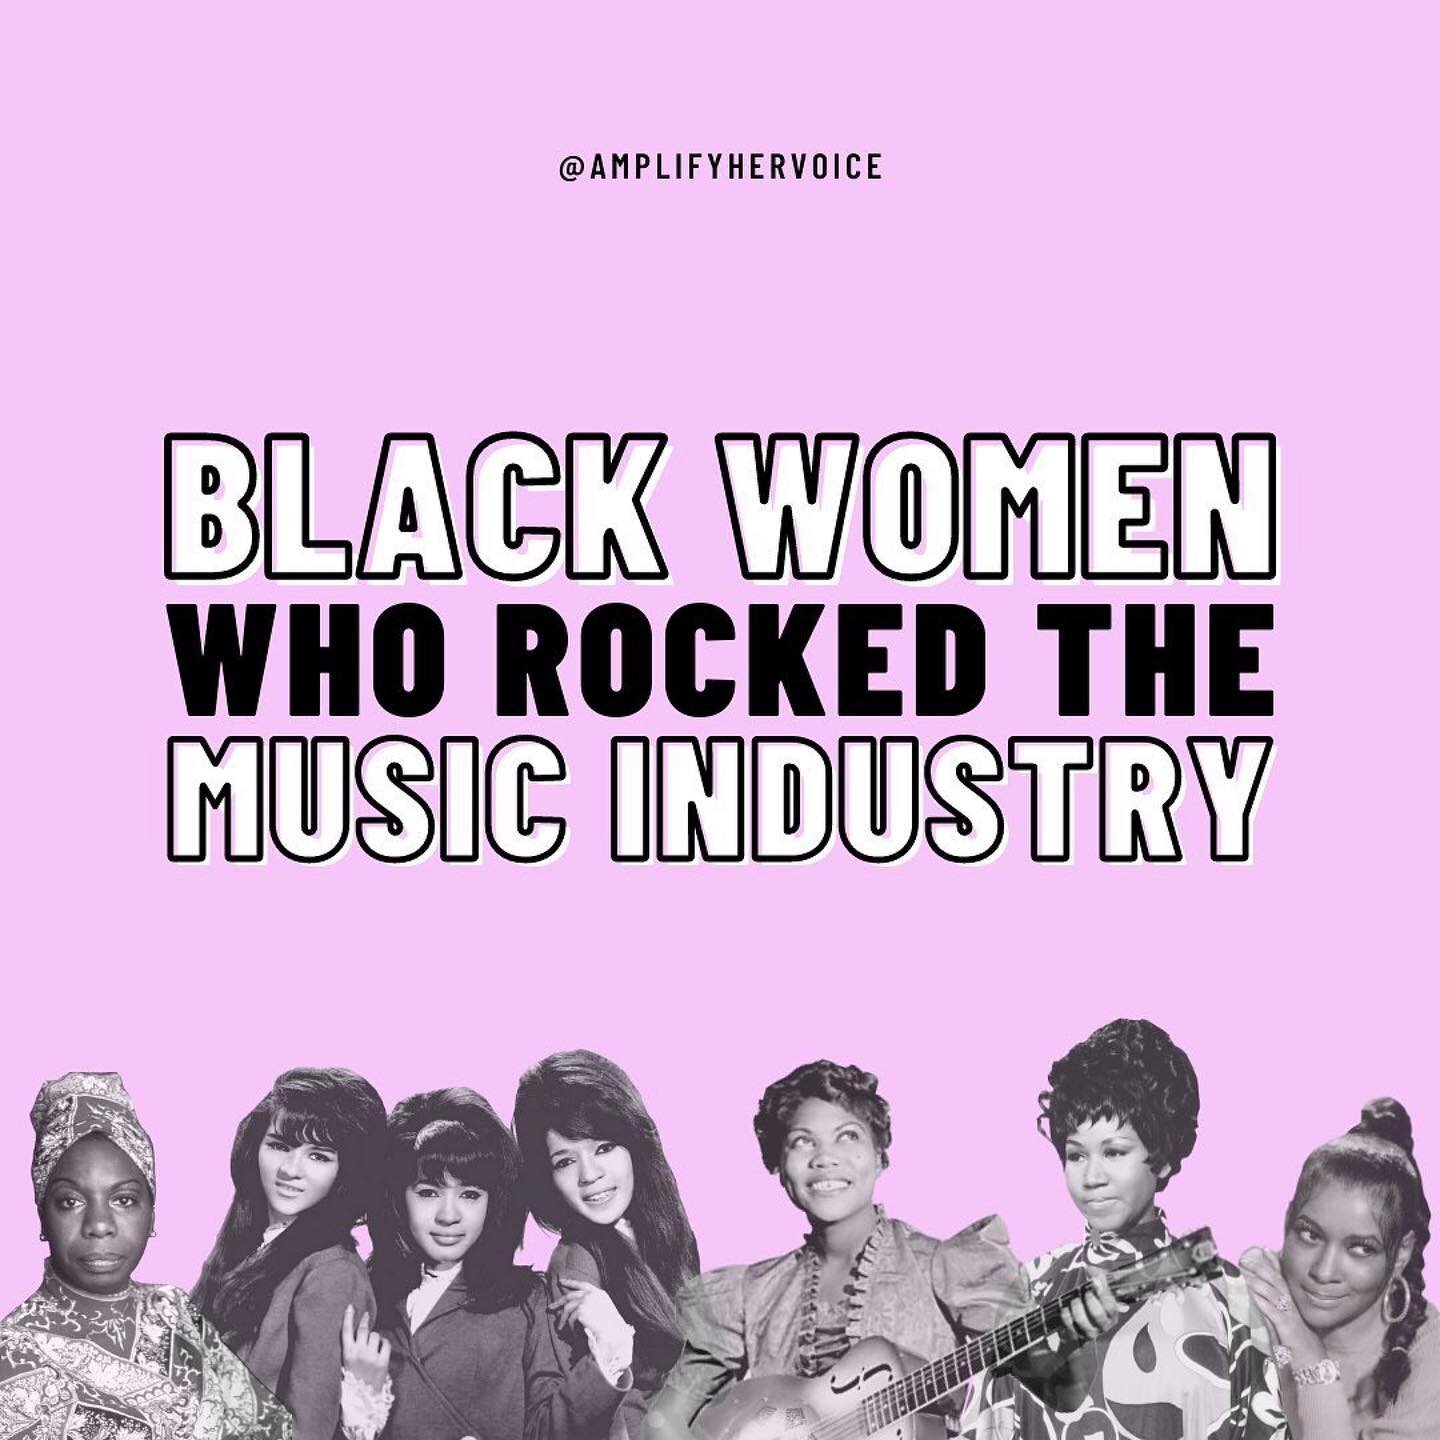 #Repost @amplifyhervoice
・・・
This month and always, we are celebrating Black women artists who have defied stereotypes, were fearless in their artistry, and have made a last impact on the music we love. 👉 Swipe to learn more about just some of the m